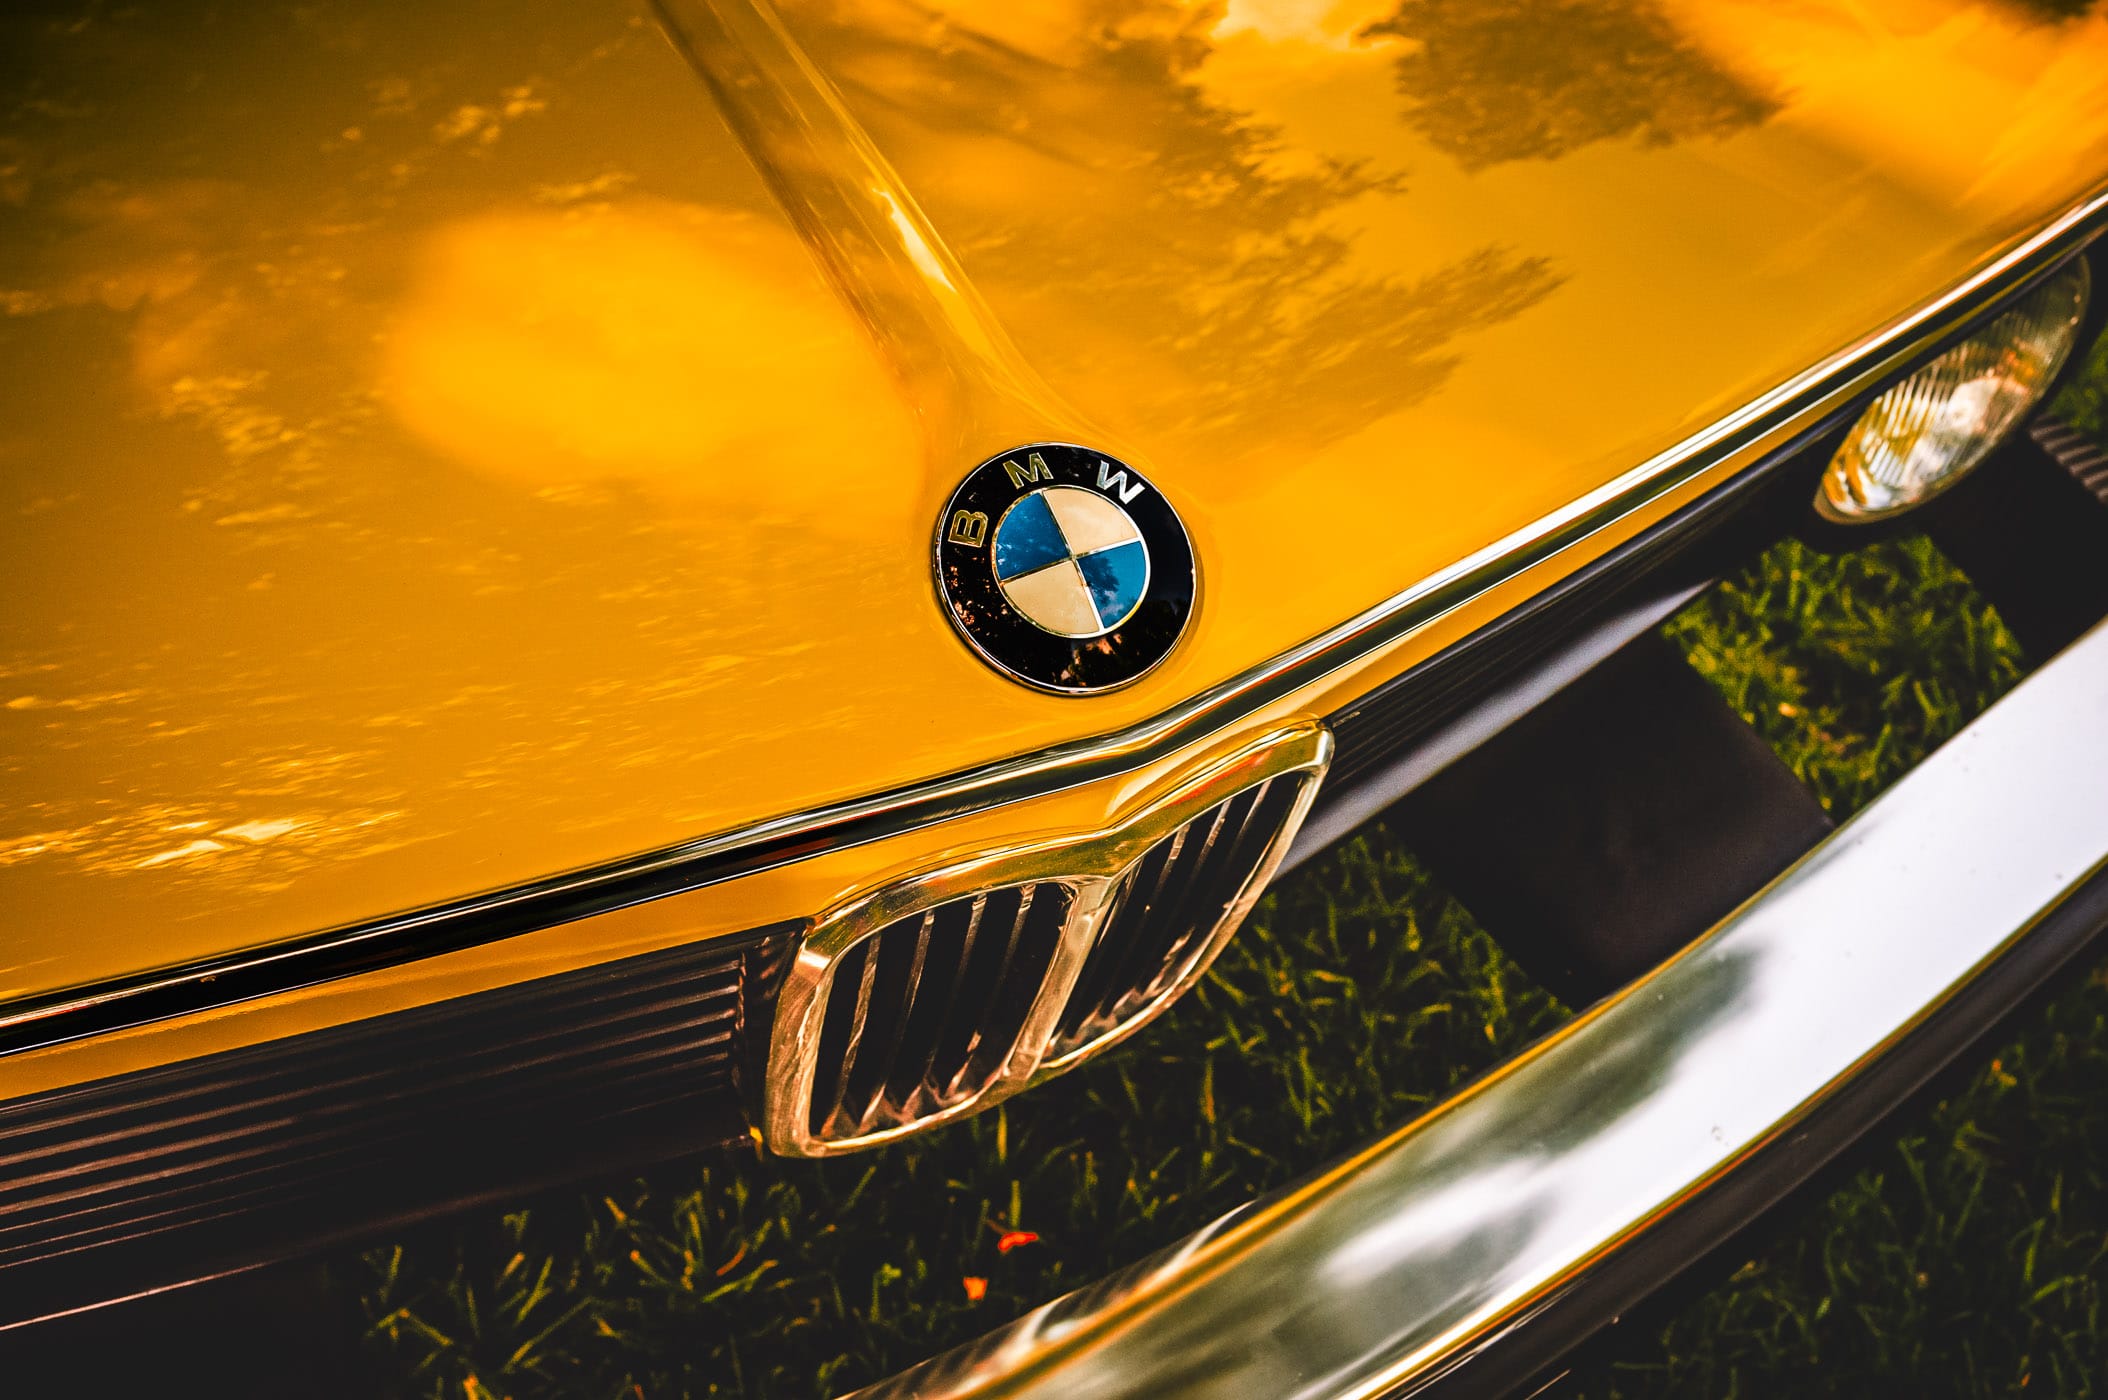 The badge of a classic BMW 2002 at the Autos in the Park event at Dallas’ Cooper Aerobics Center.